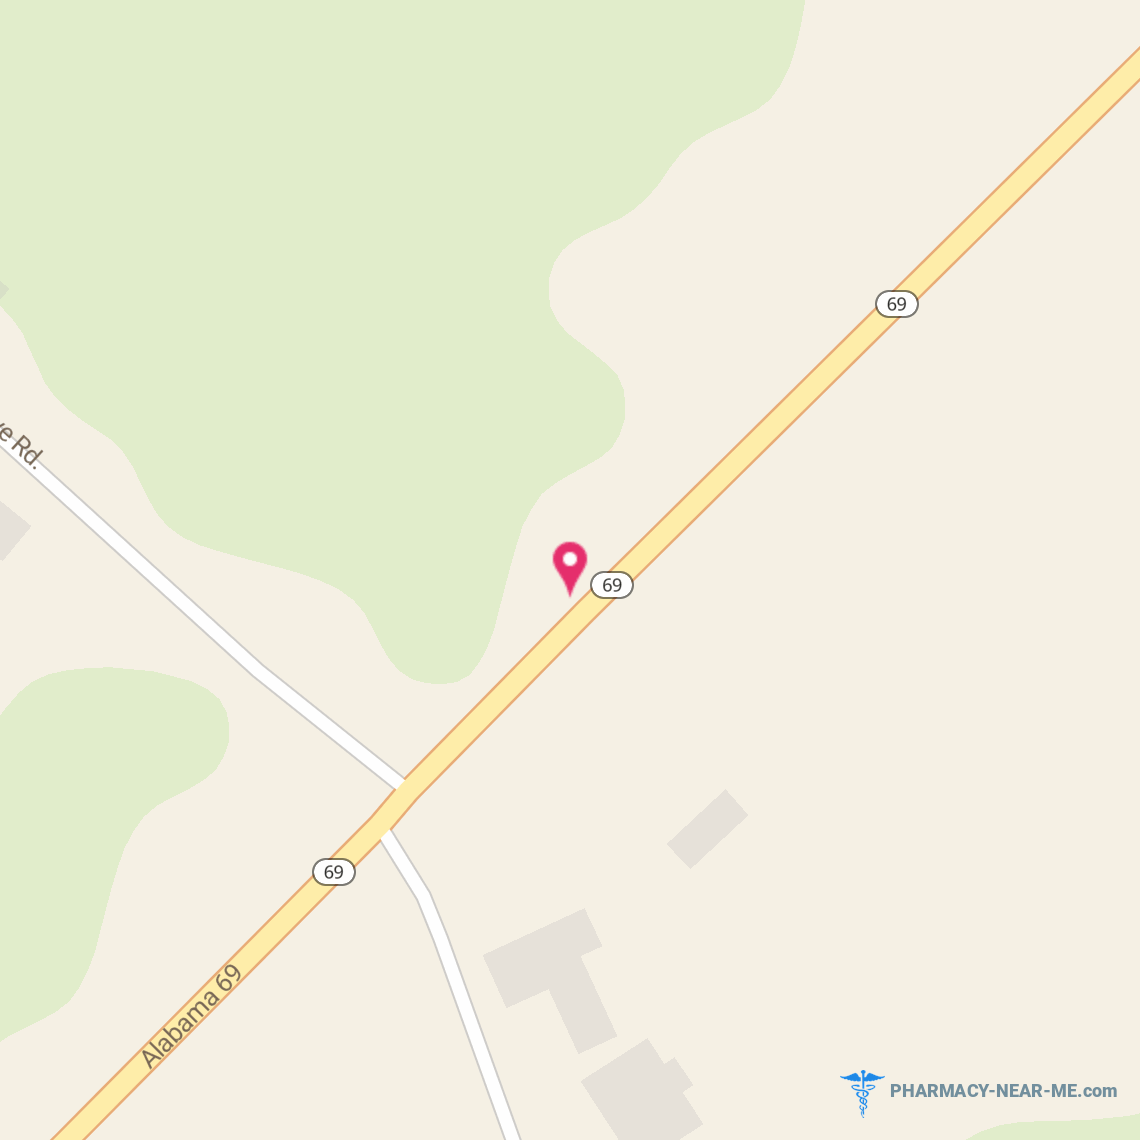 ARROWHEAD PHARMACEUTICALS, INC. - Pharmacy Hours, Phone, Reviews & Information: 561 Al Highway 69 S, Hanceville, Alabama 35077, United States